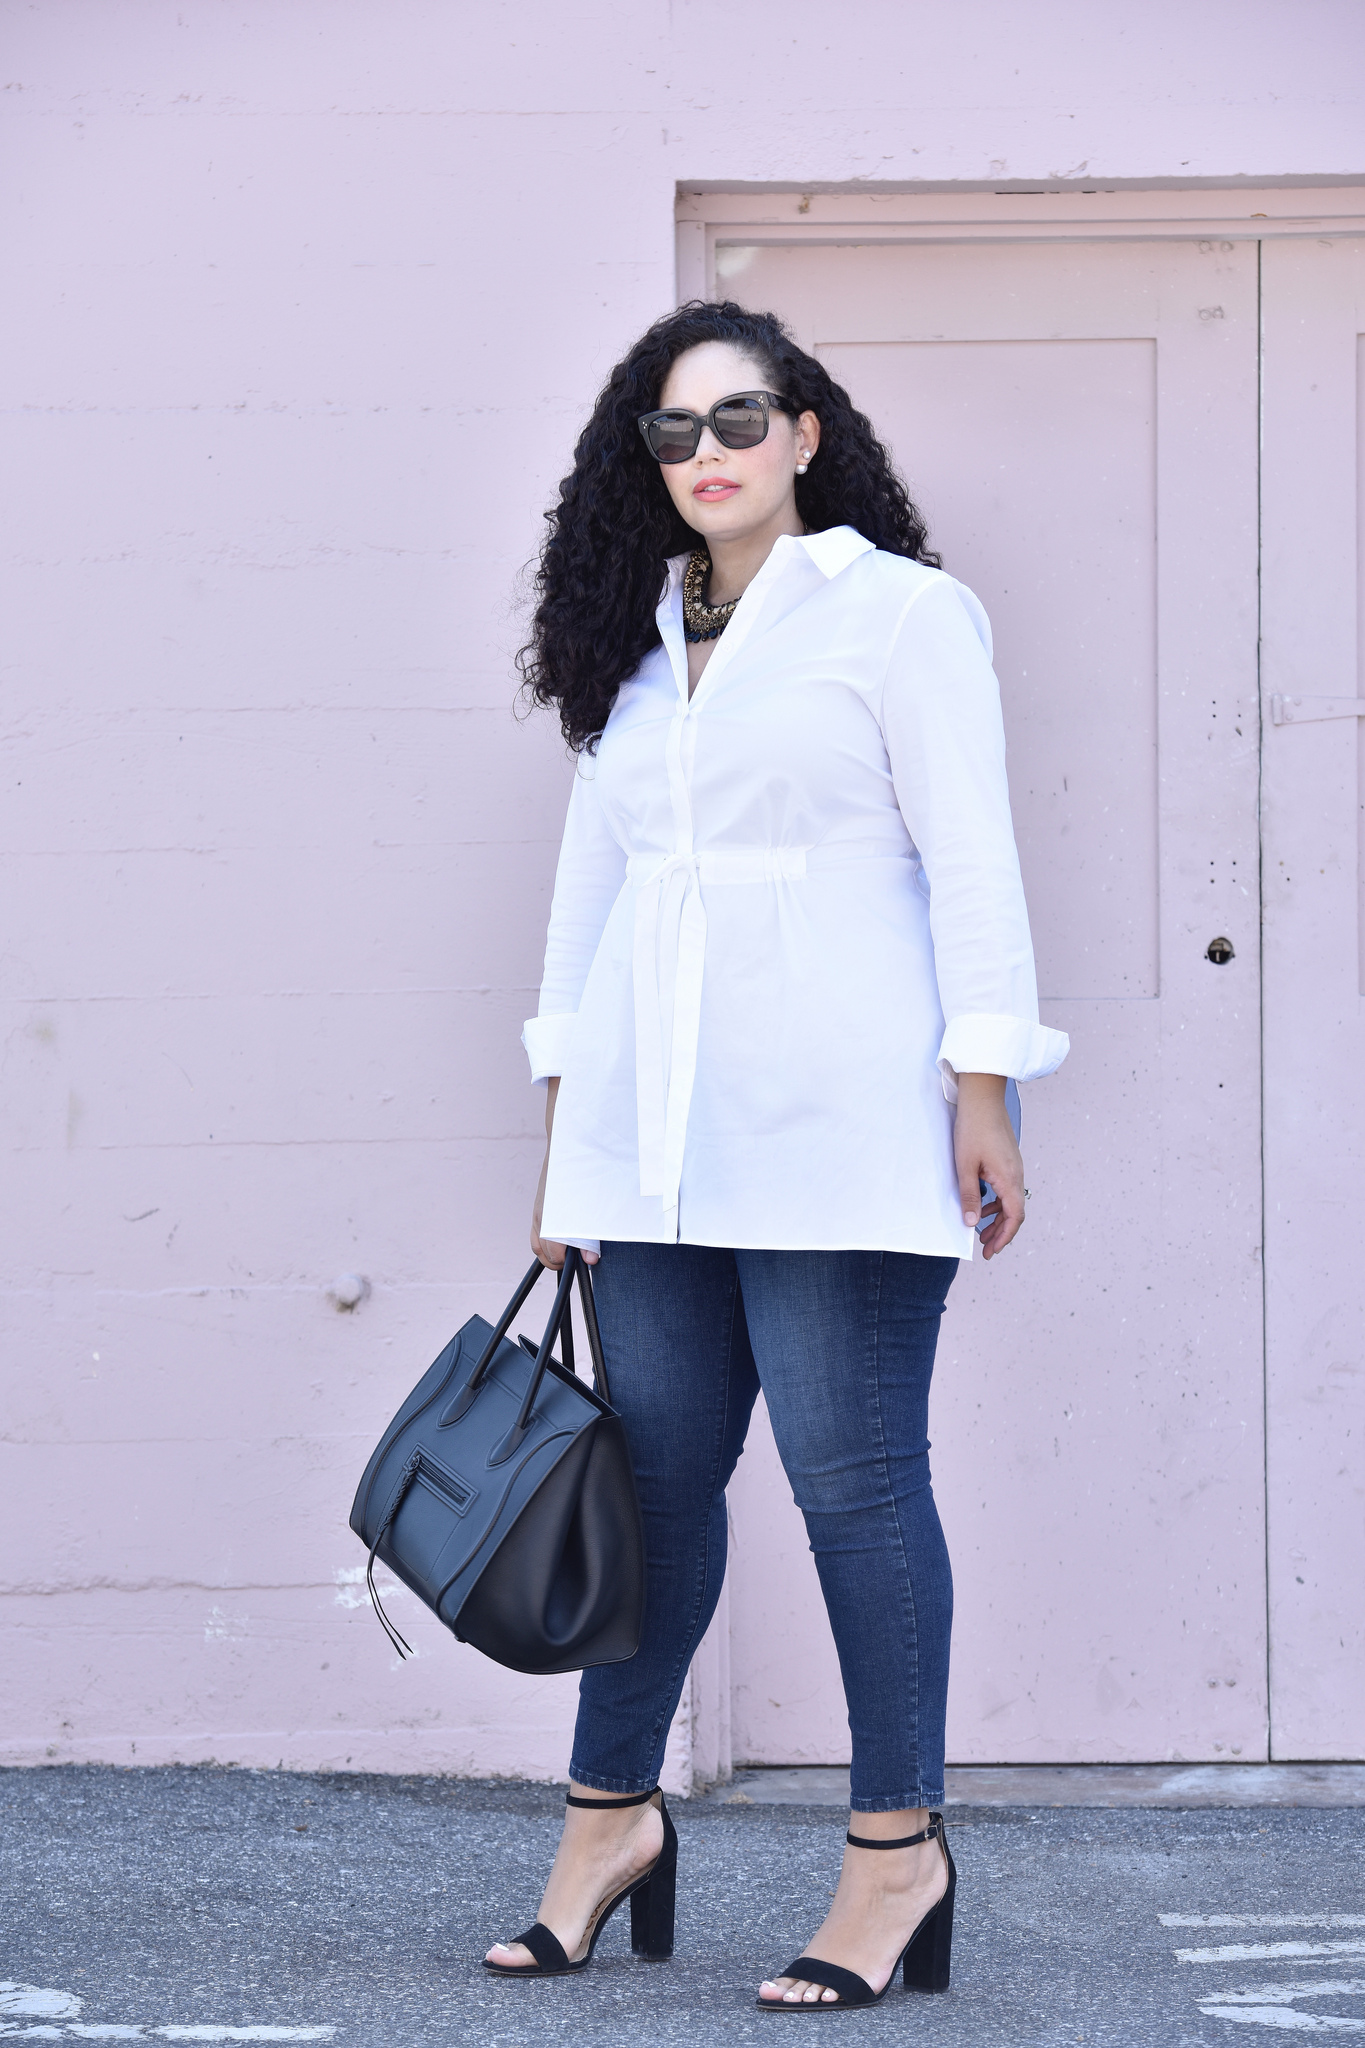 Top 10 Looks Of 2018 Via @GirlWithCurves #stylish #bloger #plussize #beauty #chic #summer #spring #fall #winter #skinnyjeans